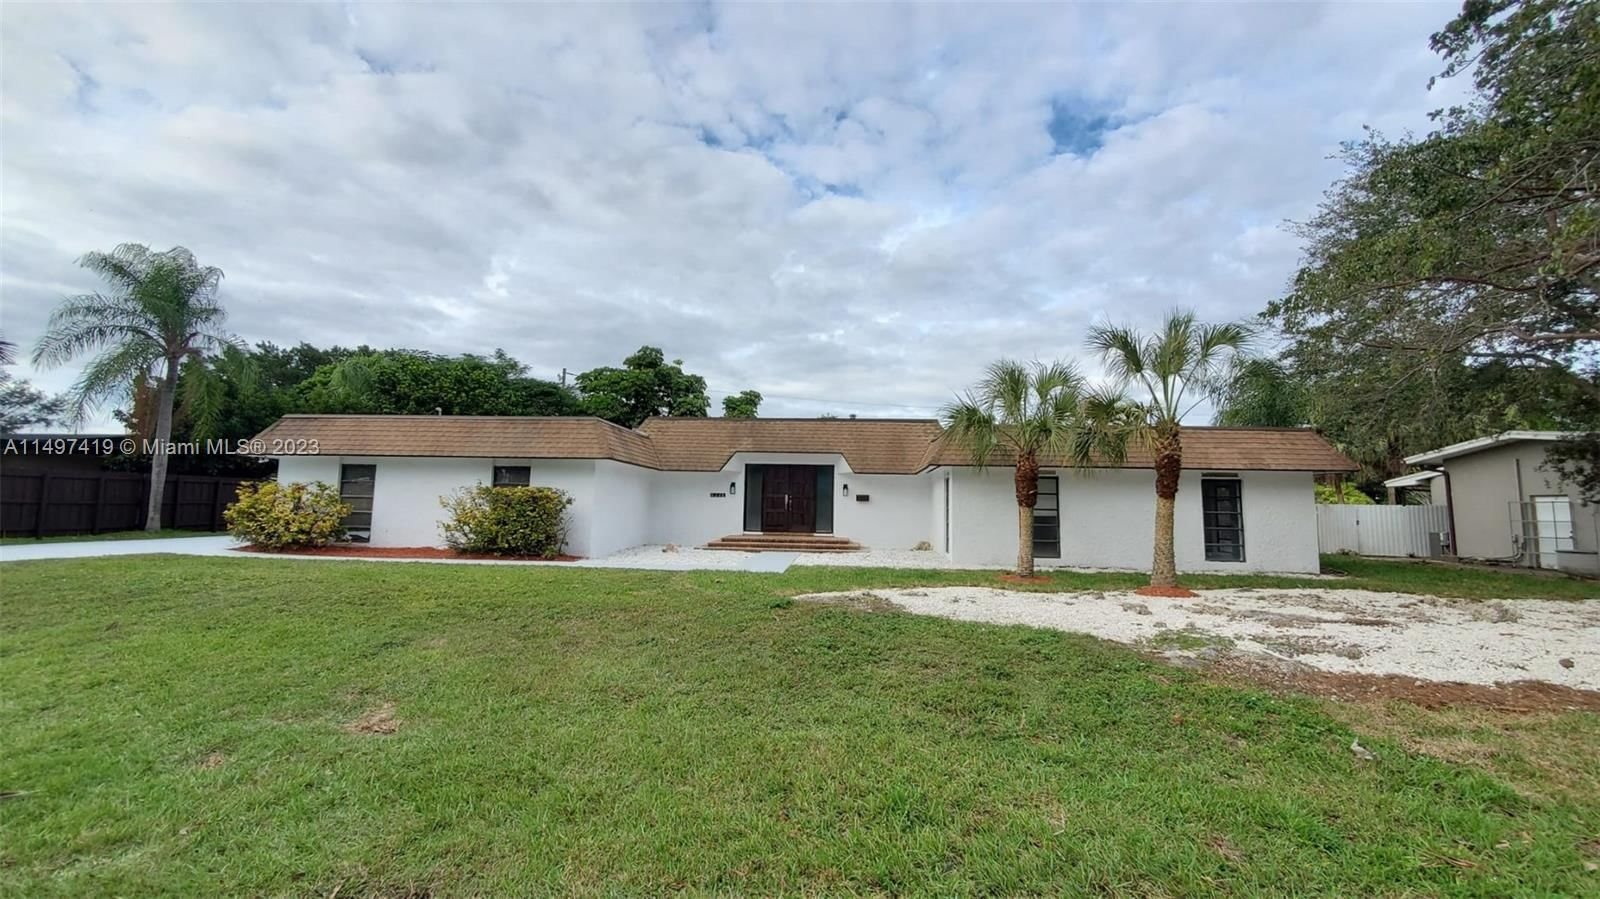 Real estate property located at 8345 184th Ter, Miami-Dade County, OMNI ESTS, Cutler Bay, FL